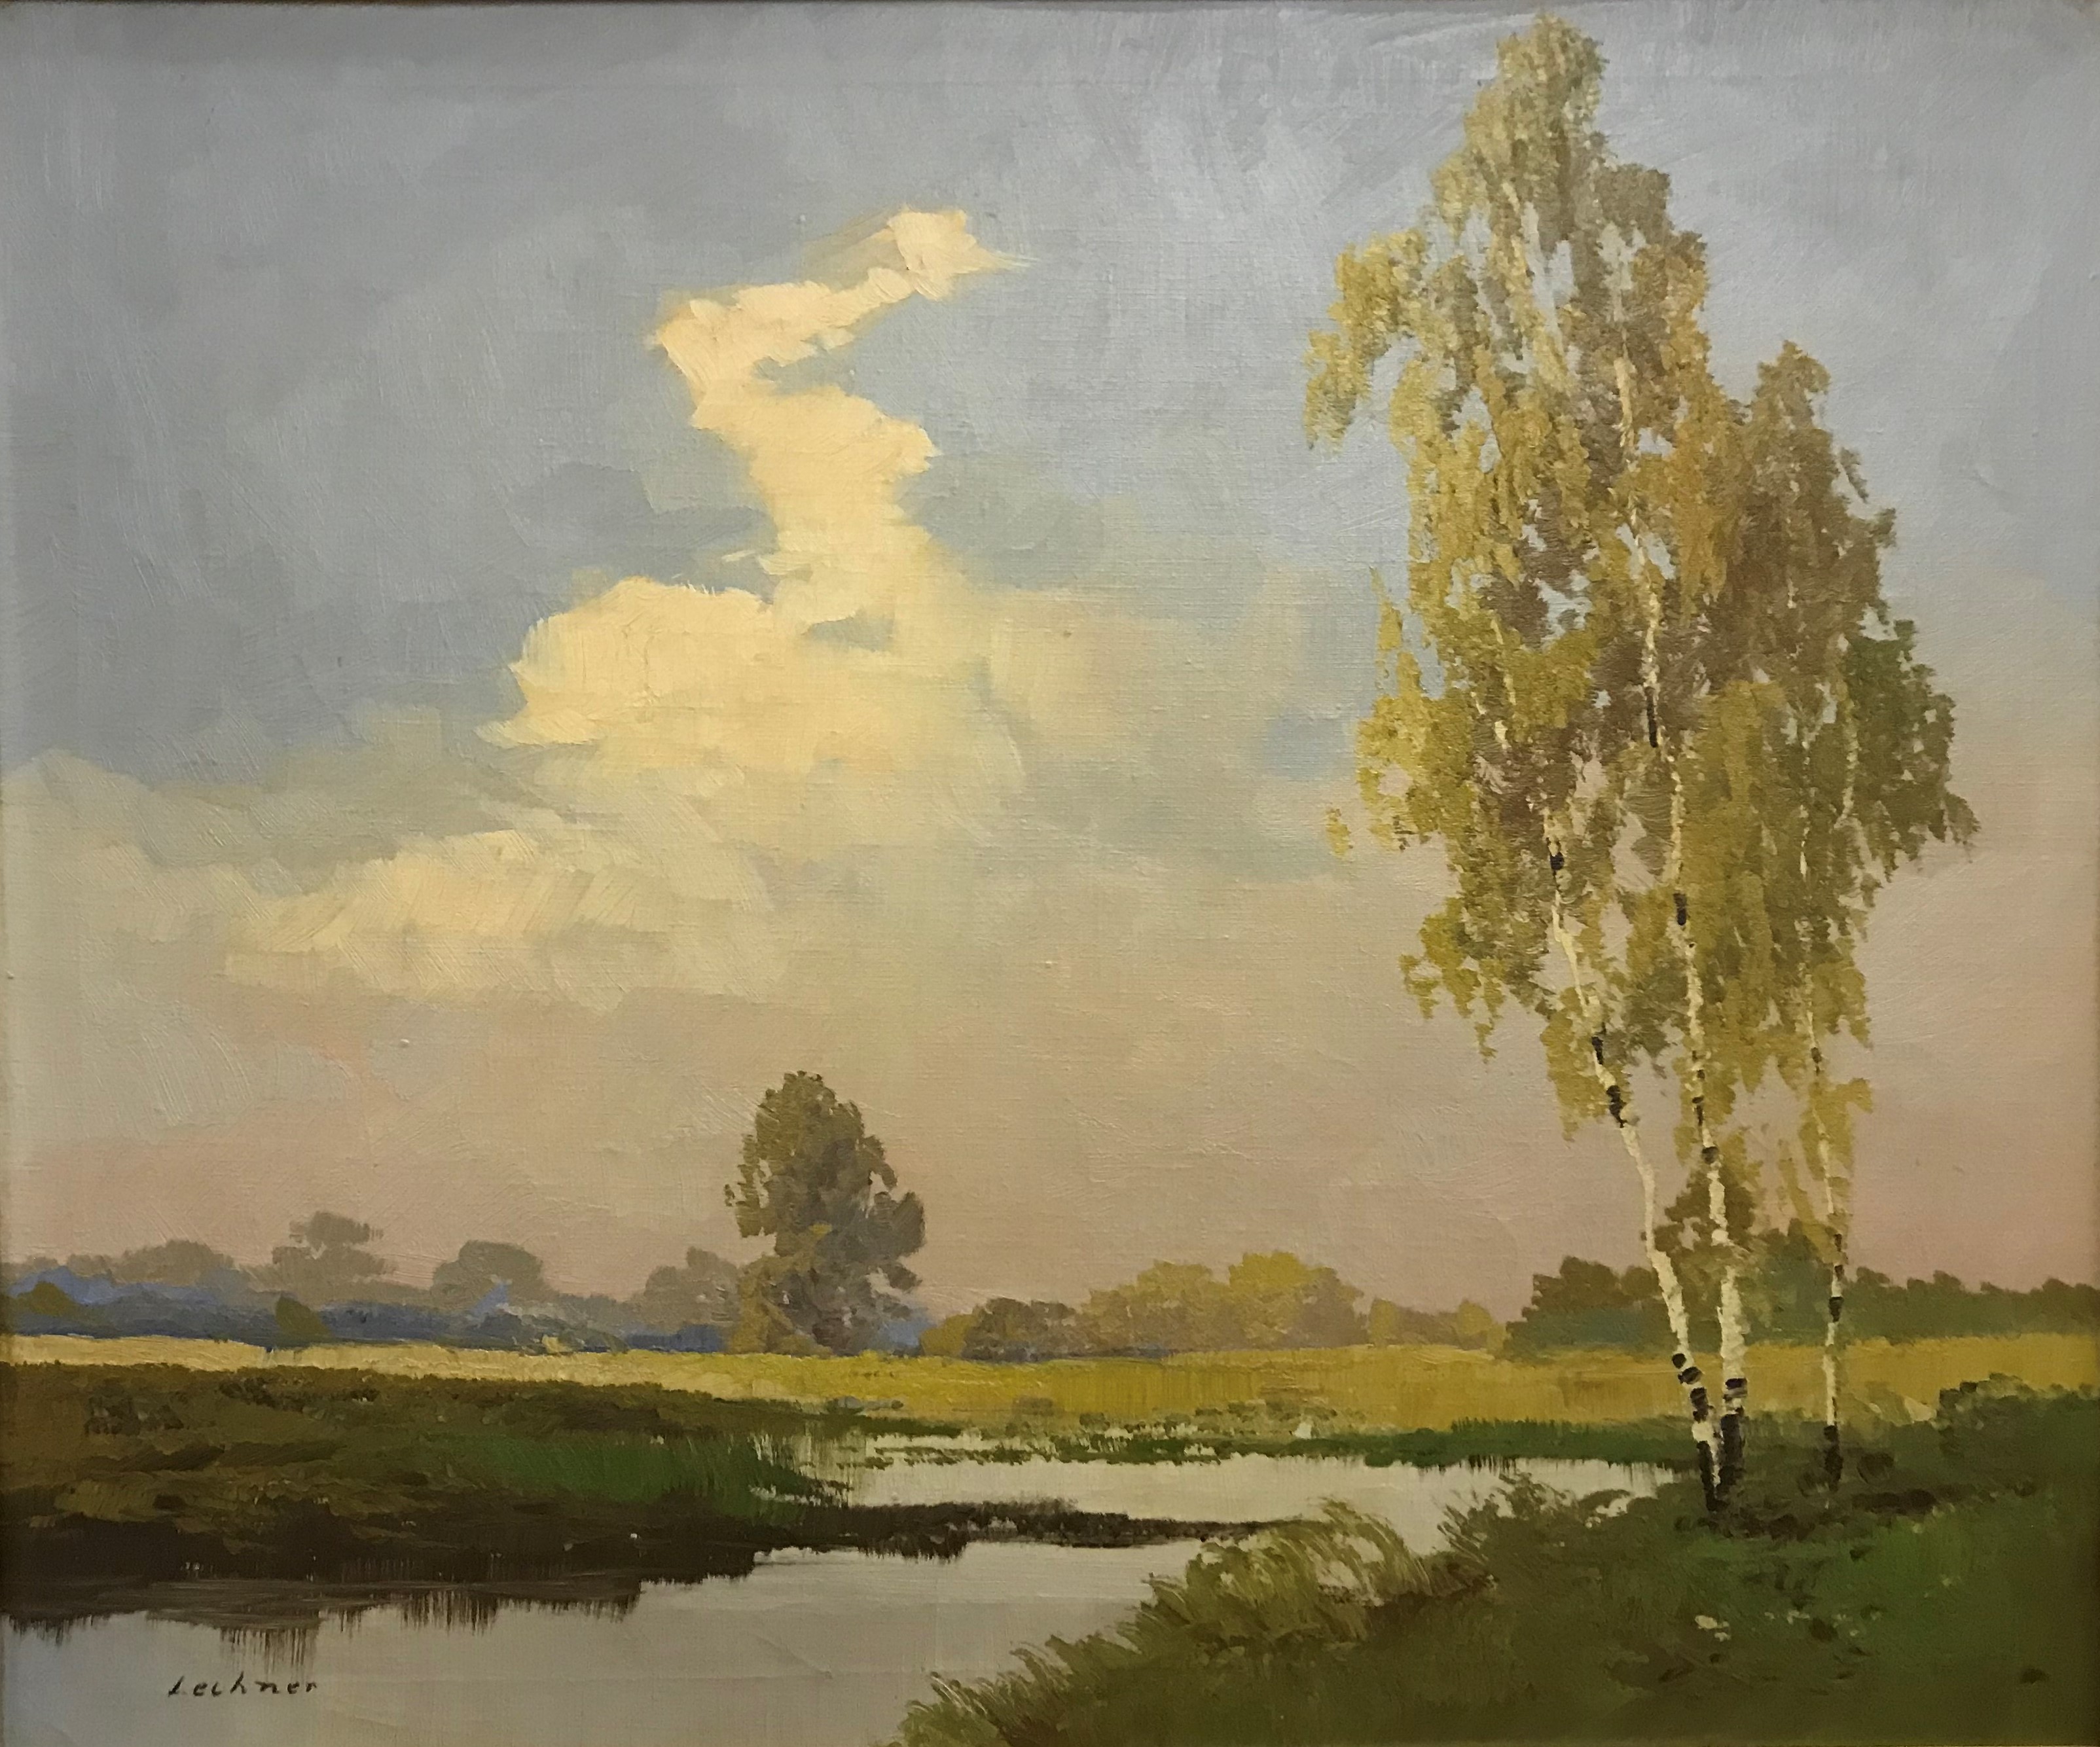 LECHNER "Study of Silver Birch by rivers